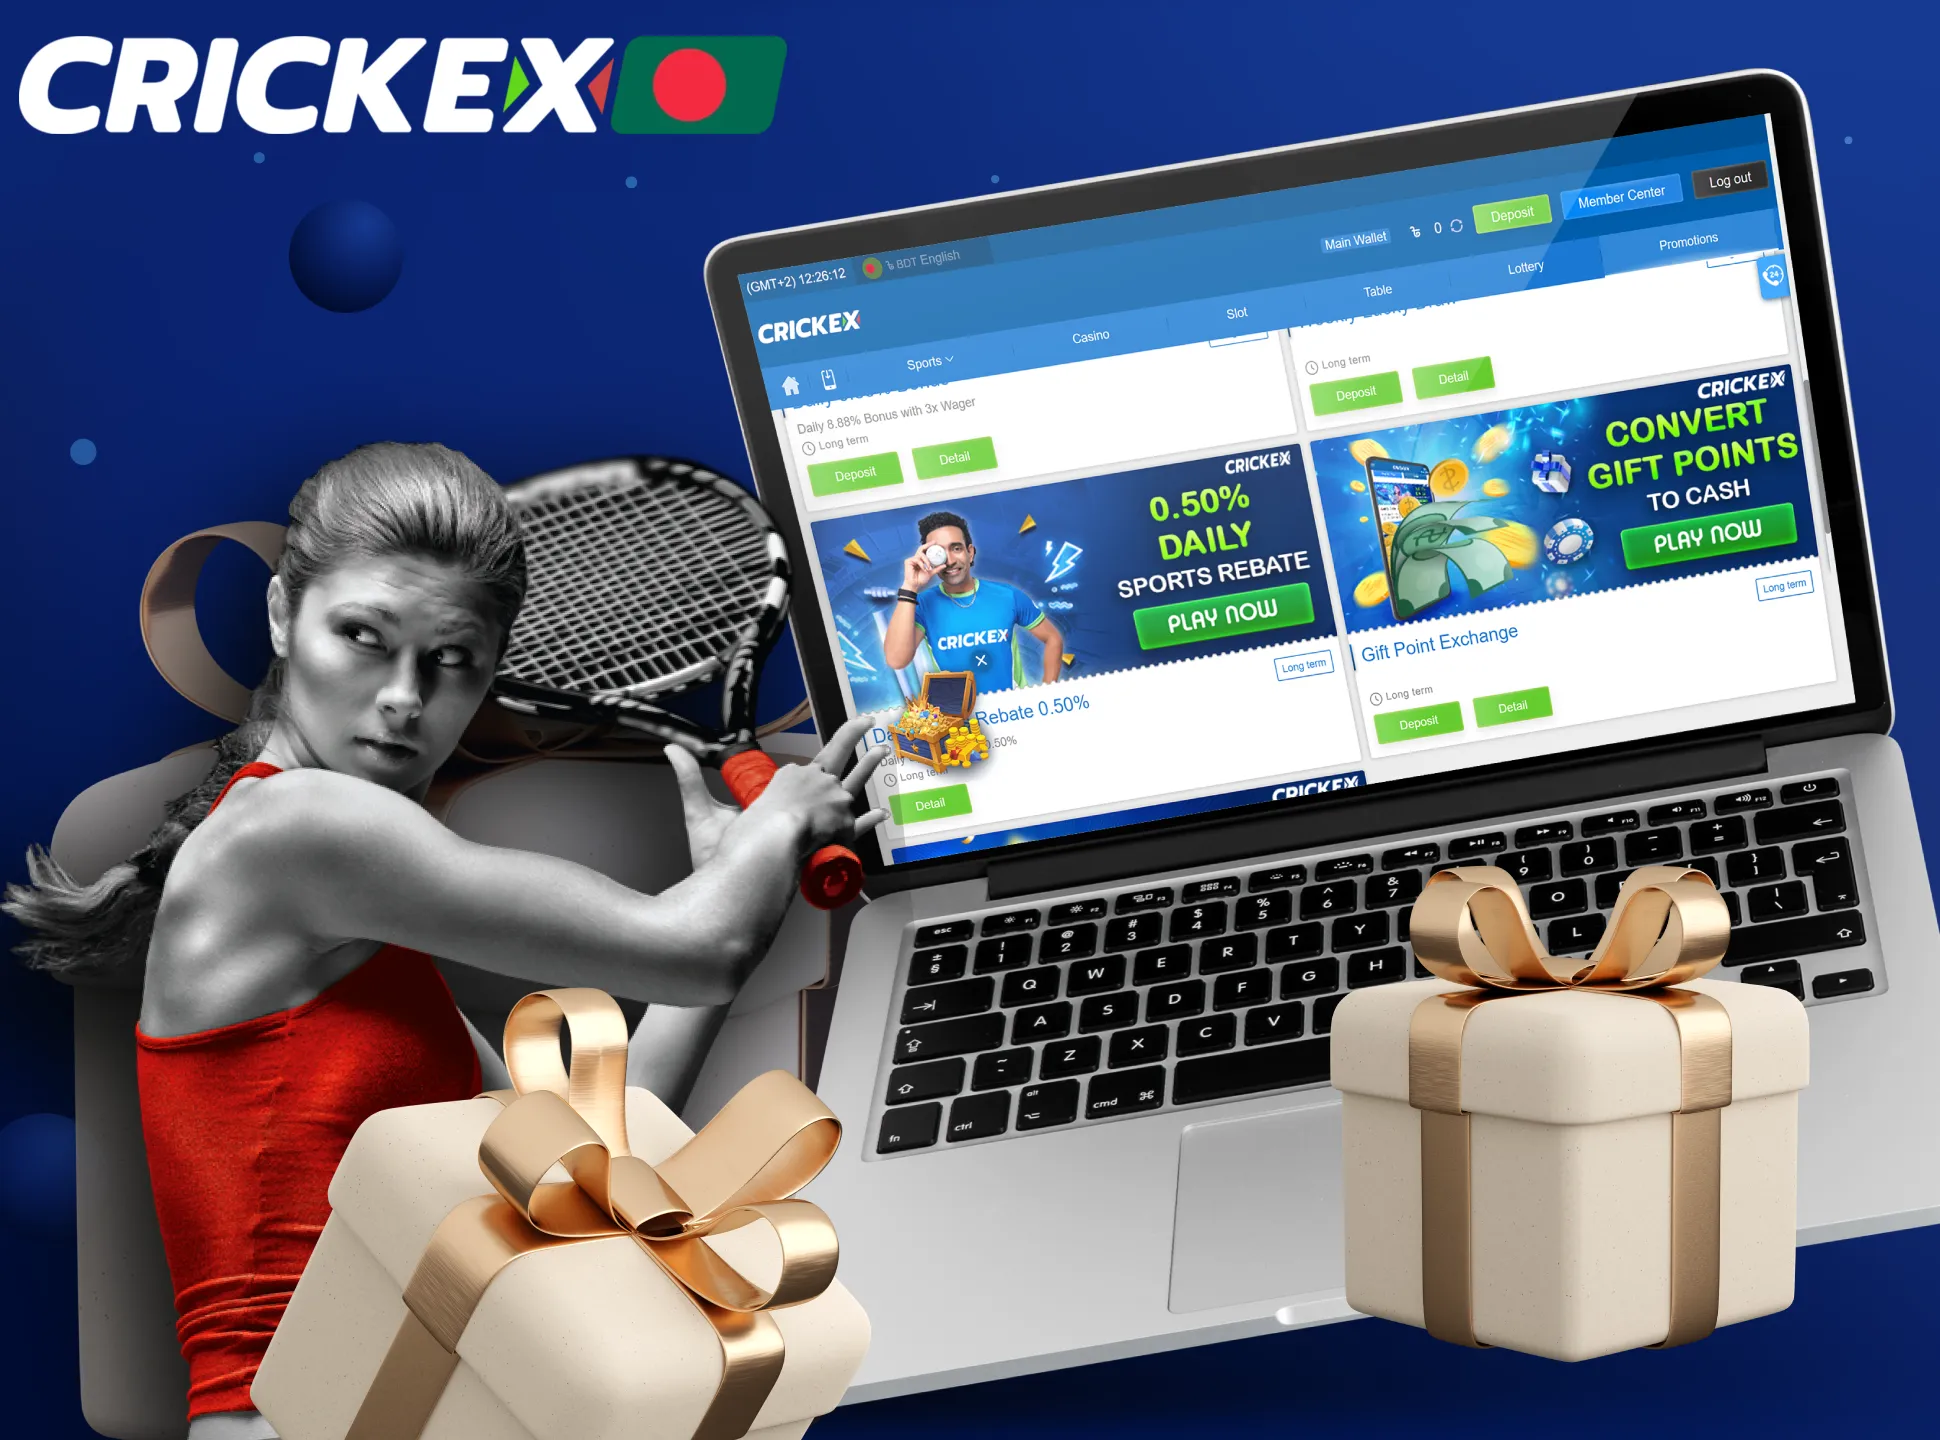 Check a full list of bonuses for tennis betting at the Crickex.